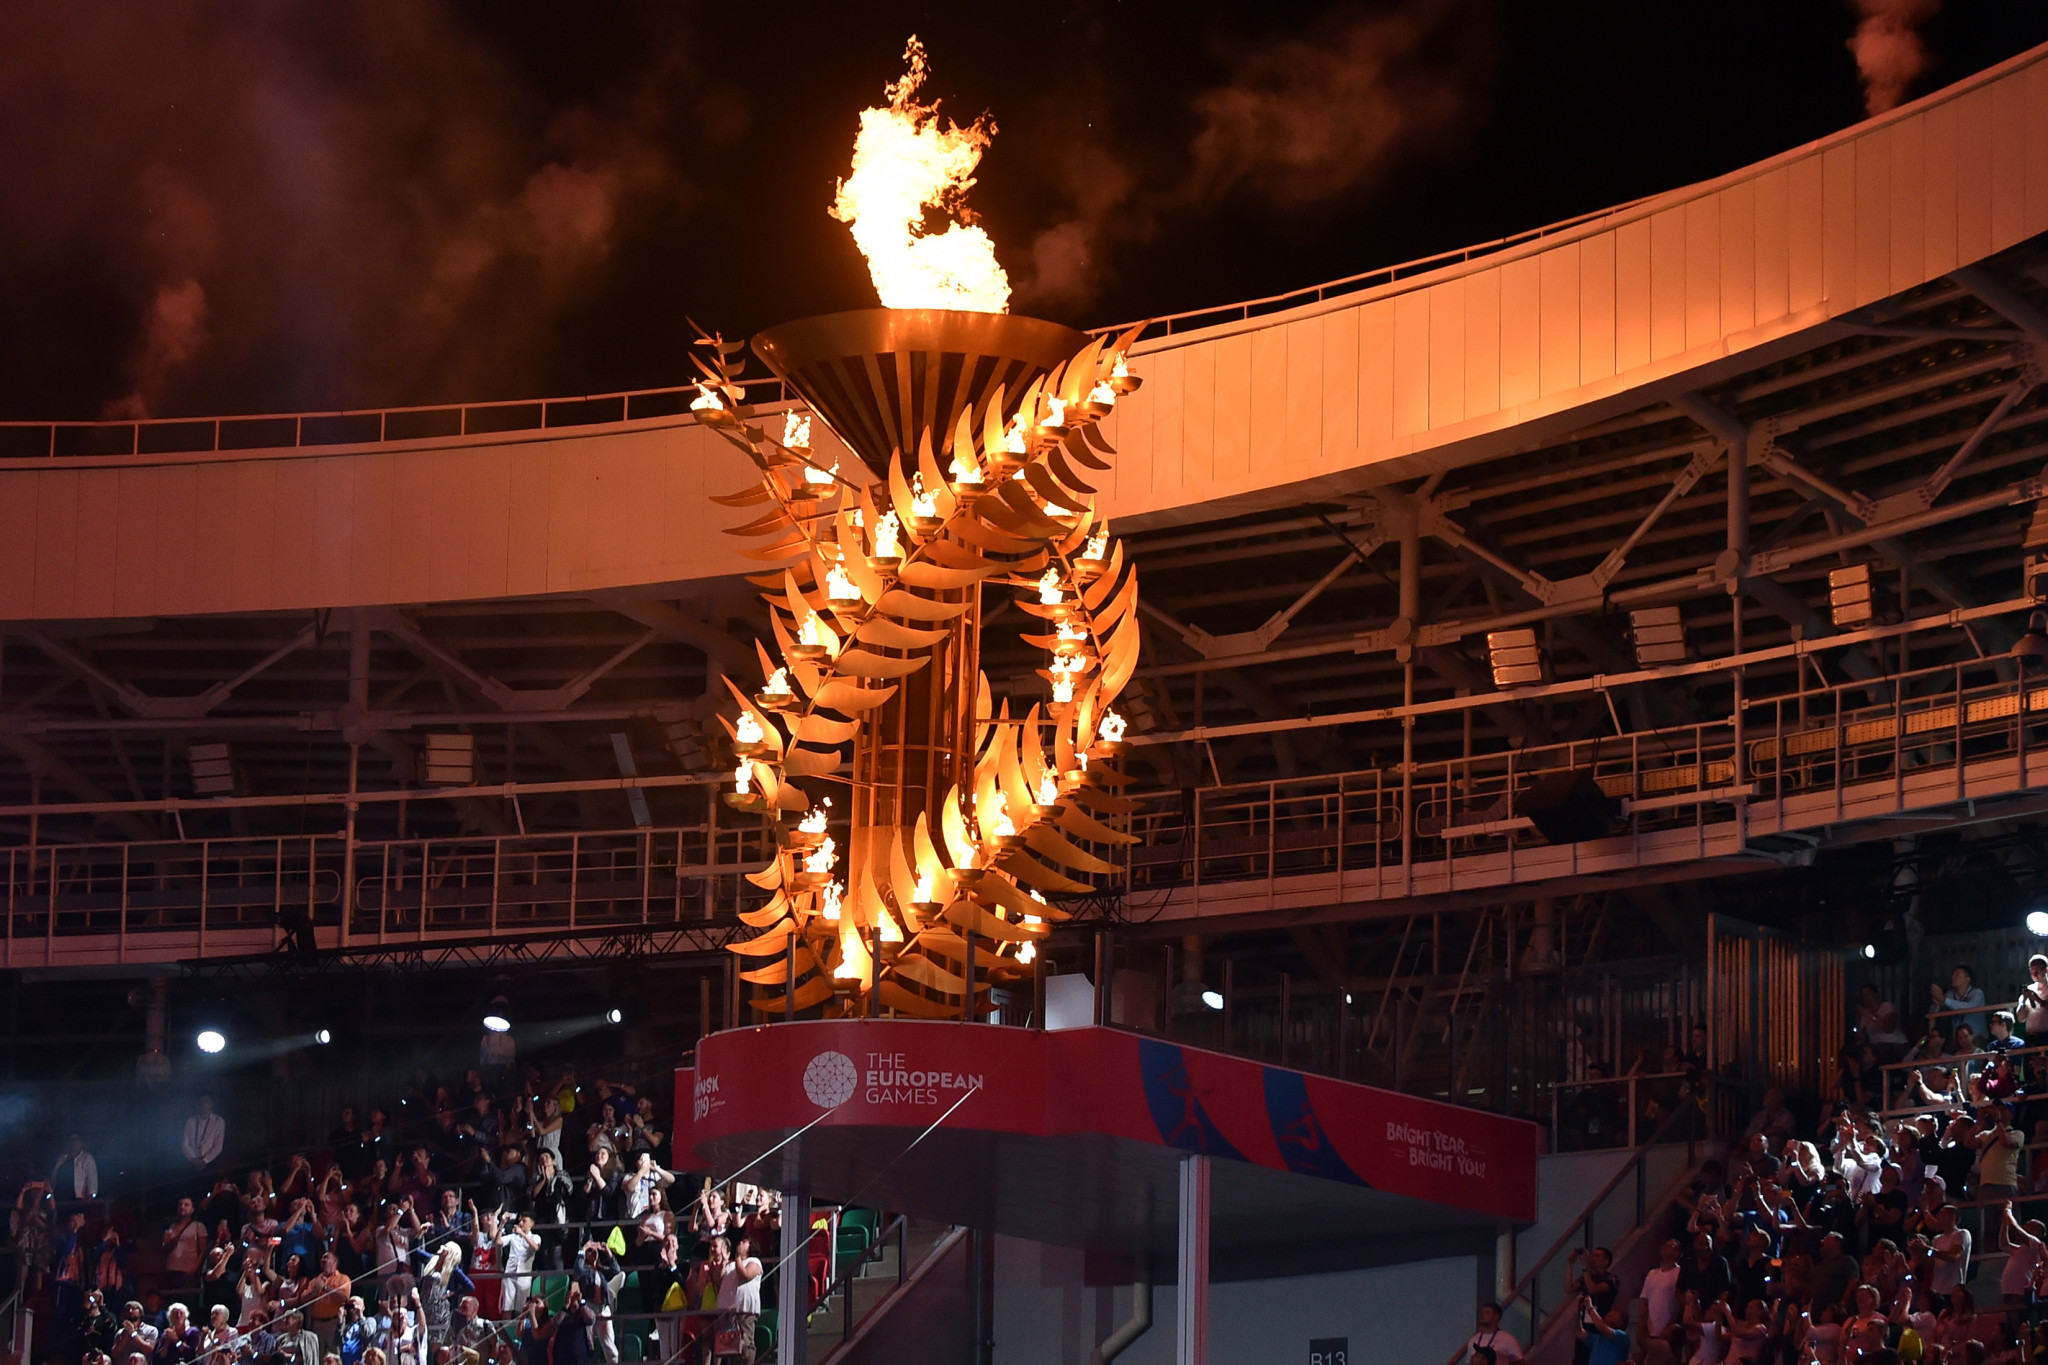 The cauldron at Dinamo Stadium in Minsk burns brightly ©Getty Images